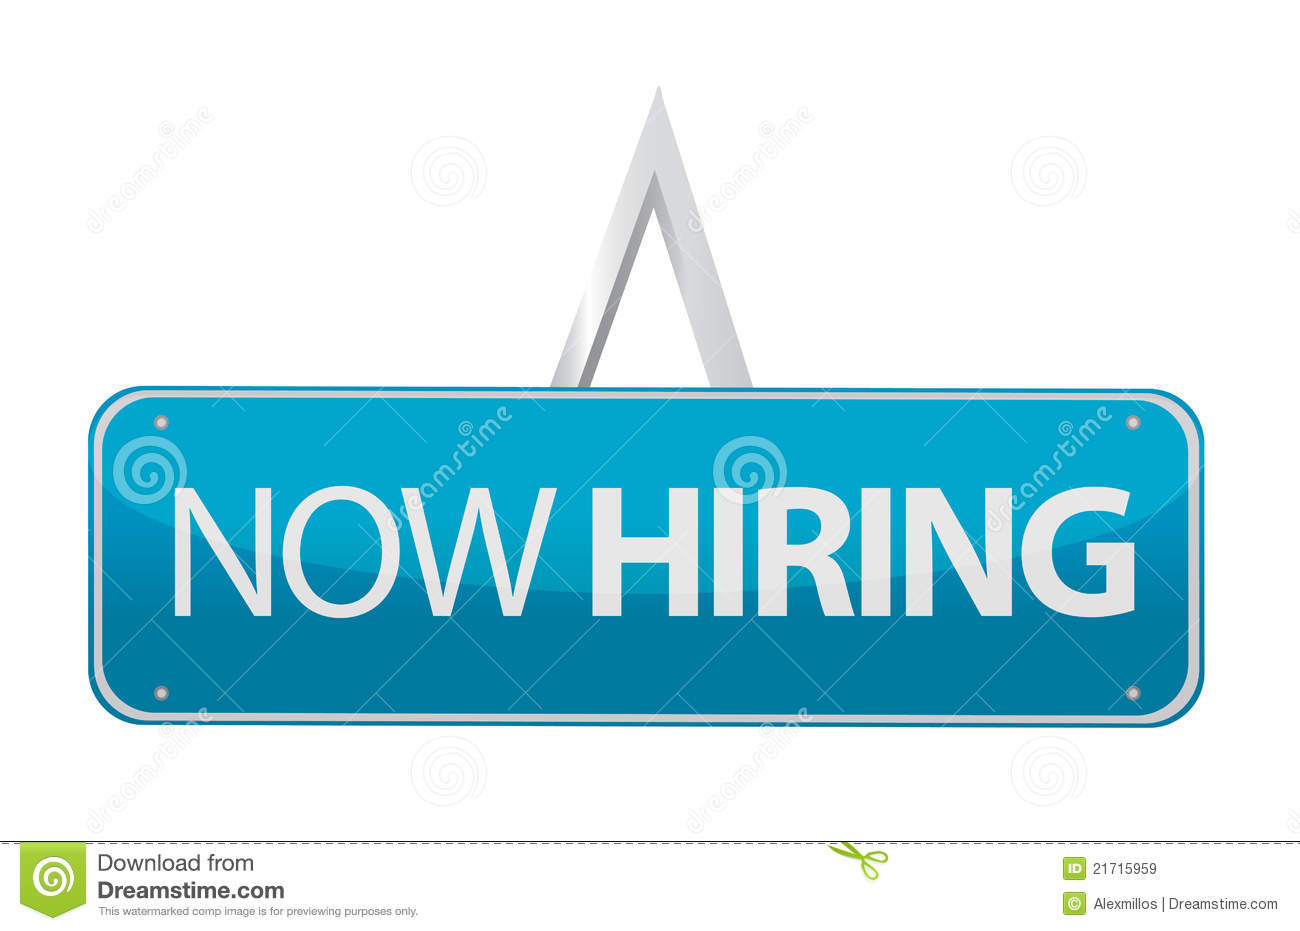 Now Hiring Sign Illustration Royalty Free Stock Images   Image